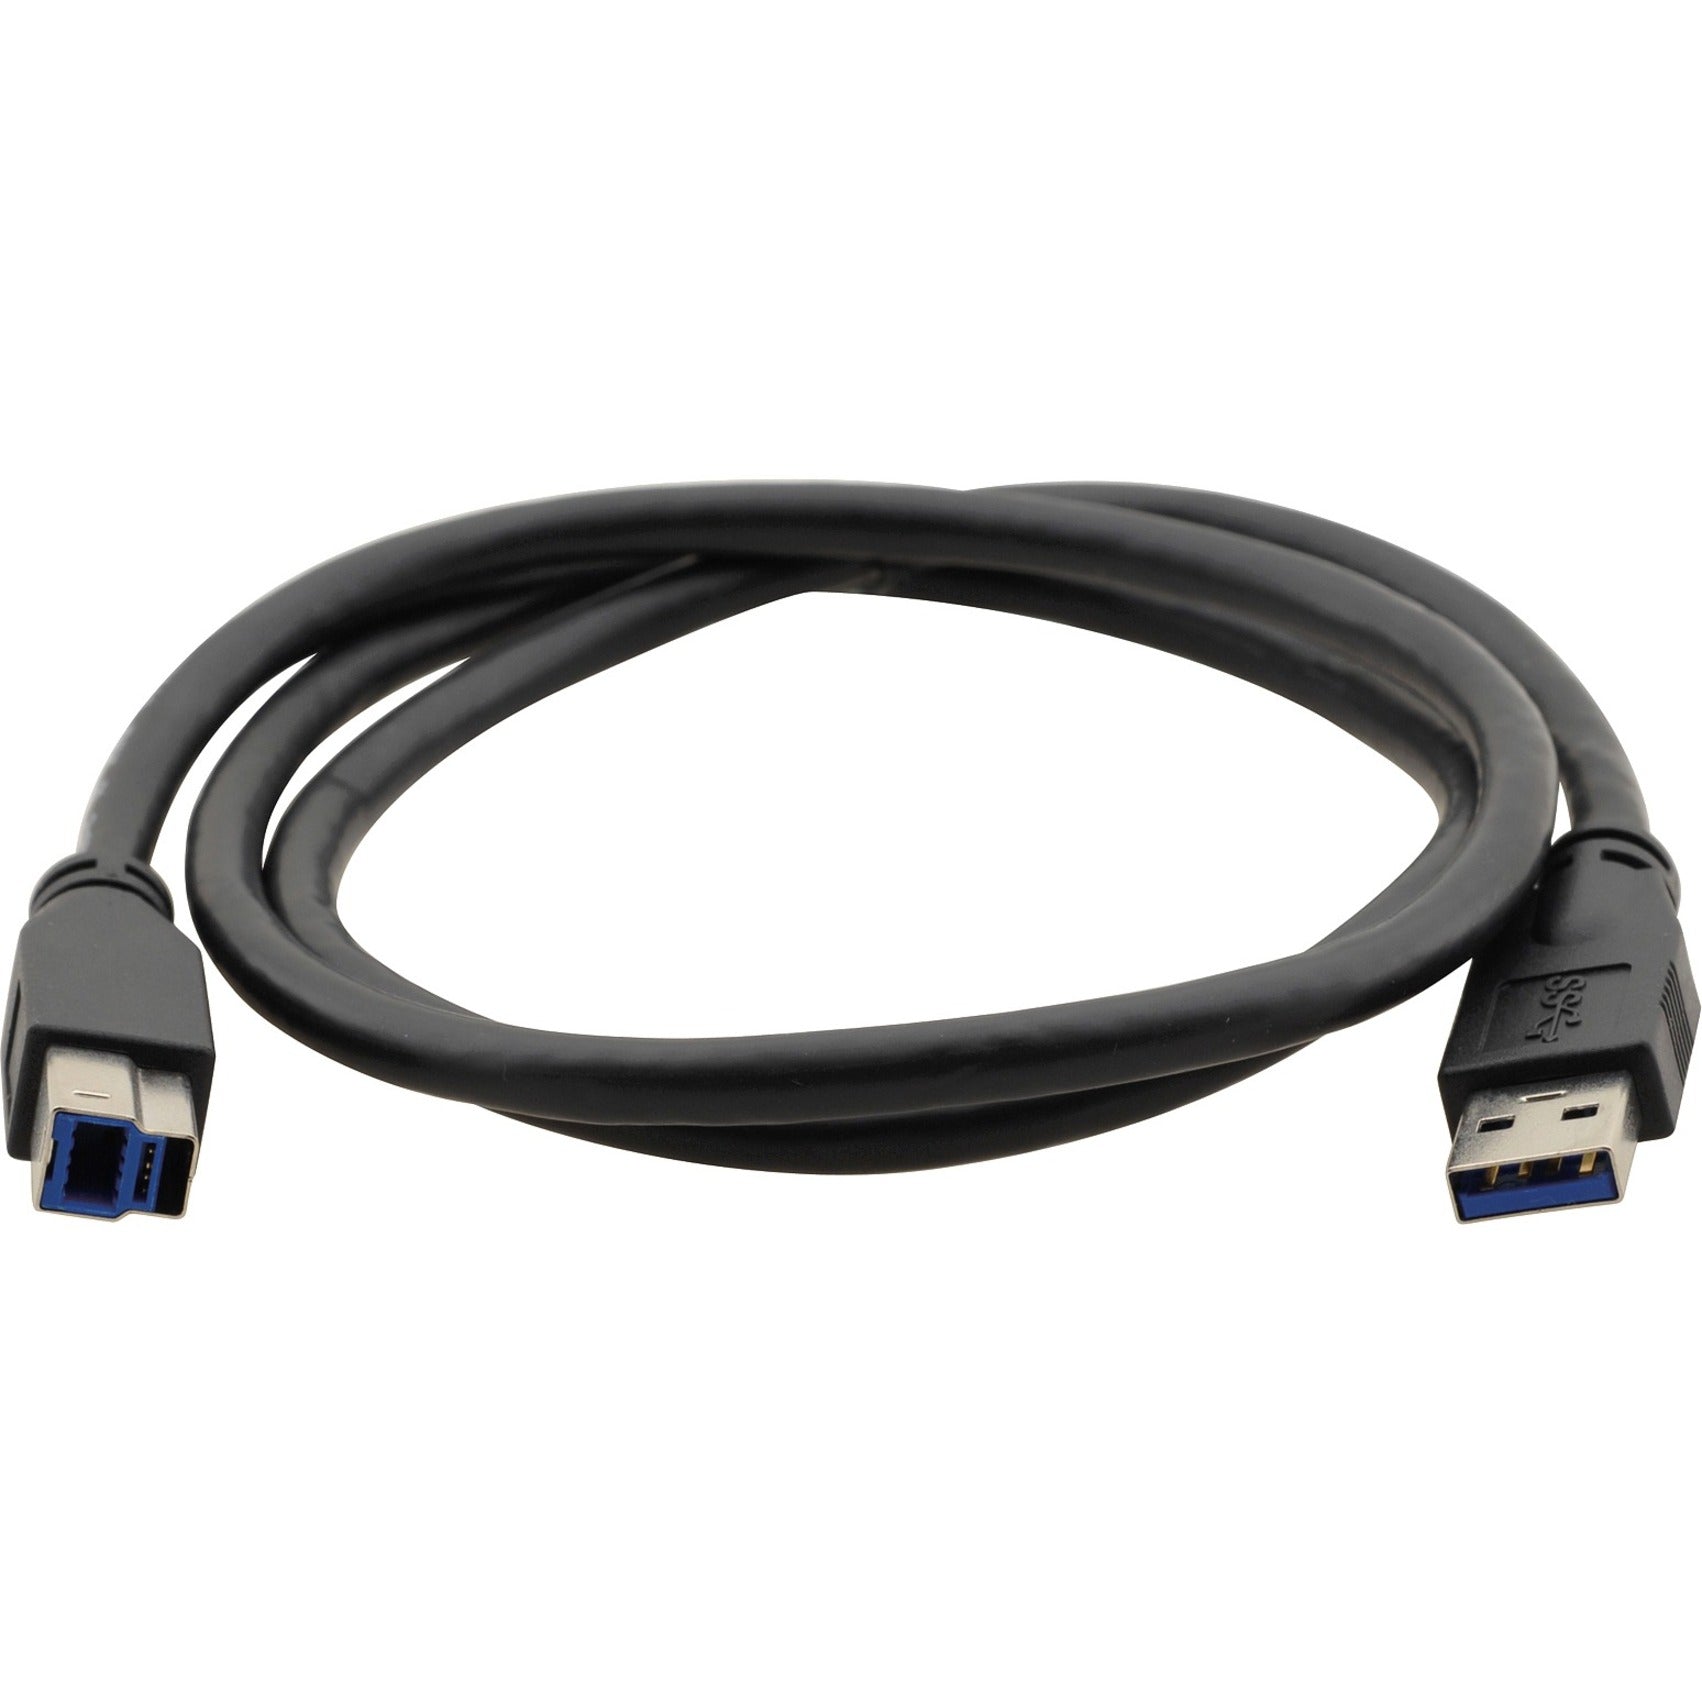 Kramer C-USB3/AB-15 USB-A to USB-B 3.0 Cable, 15 ft, Data Transfer Cable